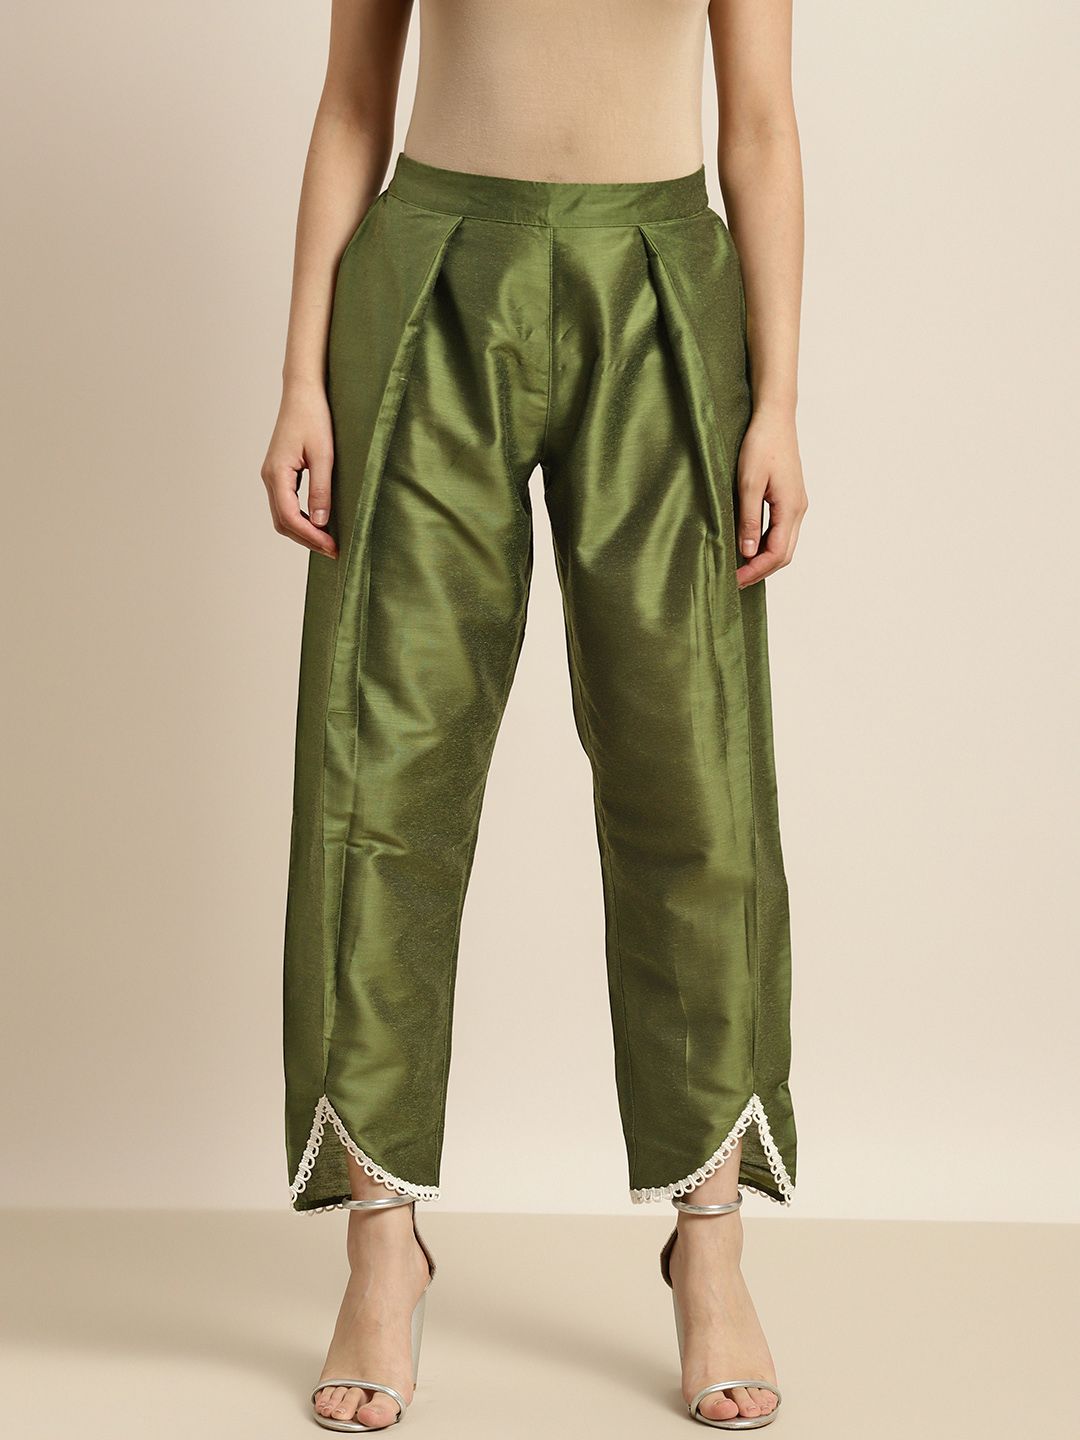 Shae by SASSAFRAS Women Olive Green Comfort Trousers Price in India